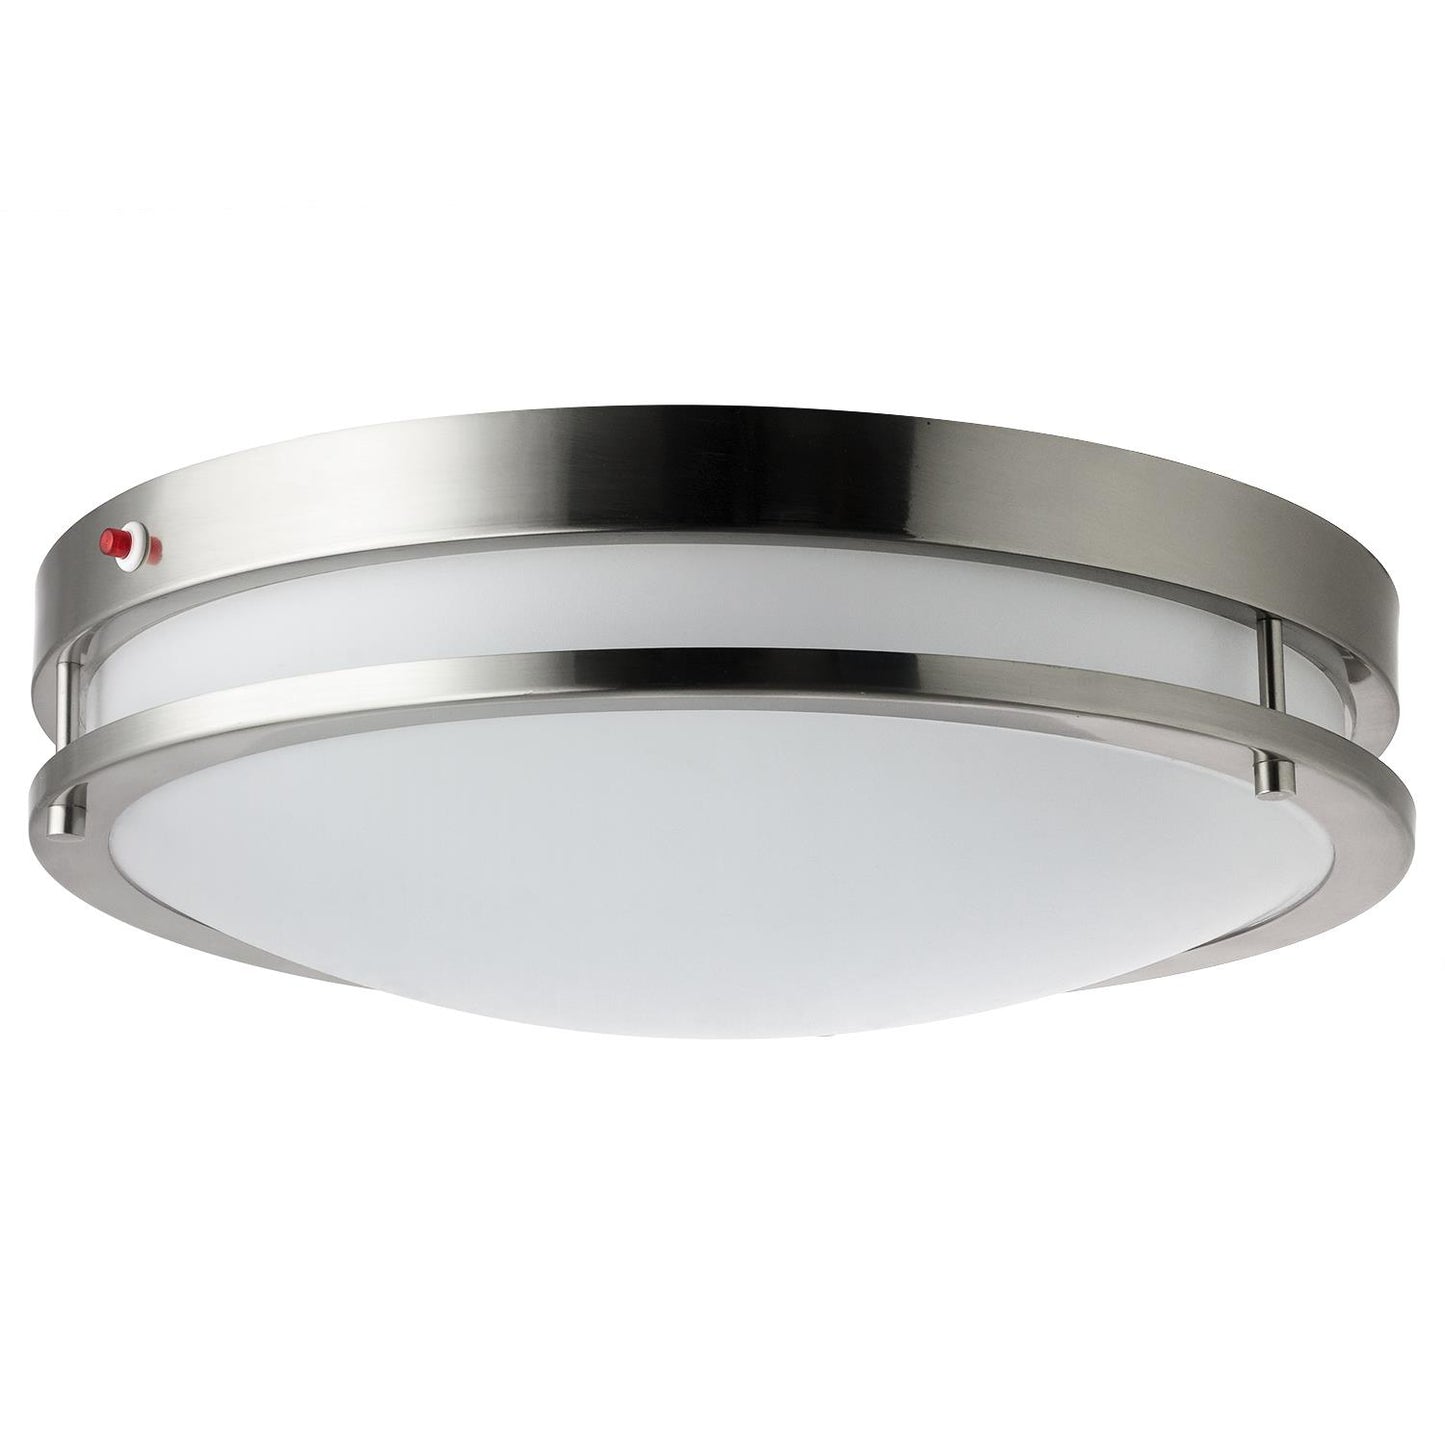 Sunlite 45605-SU LED 12-Inch Decorative Ceiling Light Fixture, Built-In Emergency Backup Battery, 23 Watt (150W Equivalent, 1800 Lumen, Brushed Nickel Finish, Dimmable, ETL Listed, 40K - Cool White